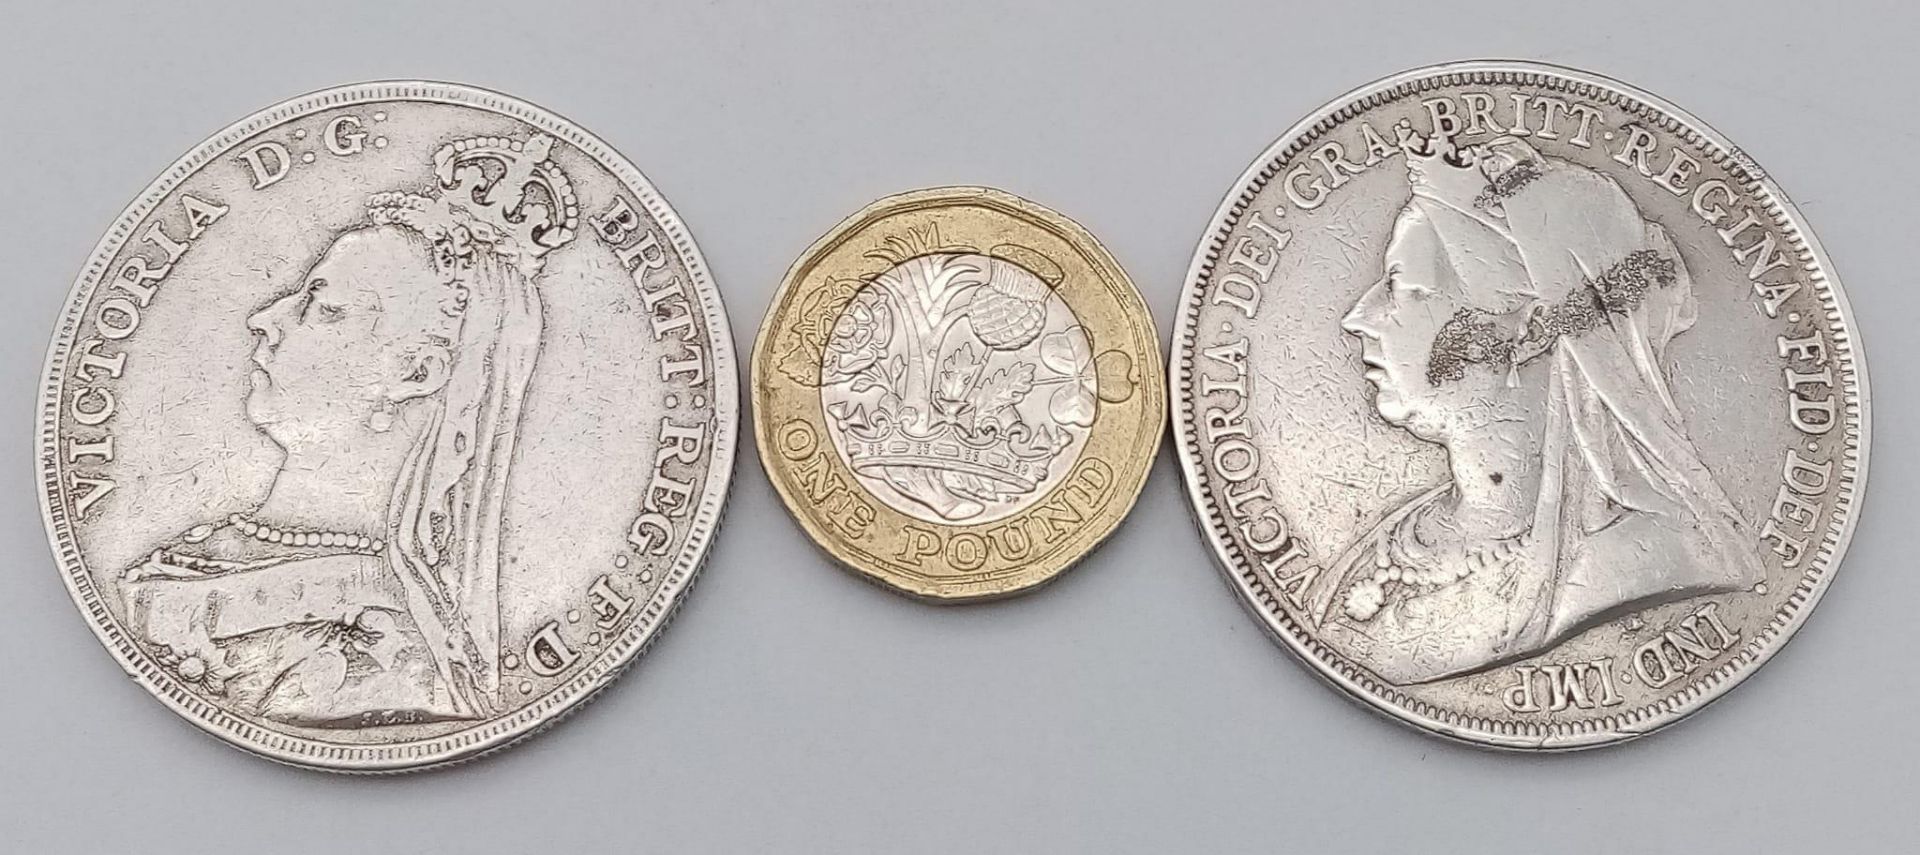 Two Queen Victoria Silver Crowns - 1892 and 1893. Please see photos for conditions. - Image 3 of 3